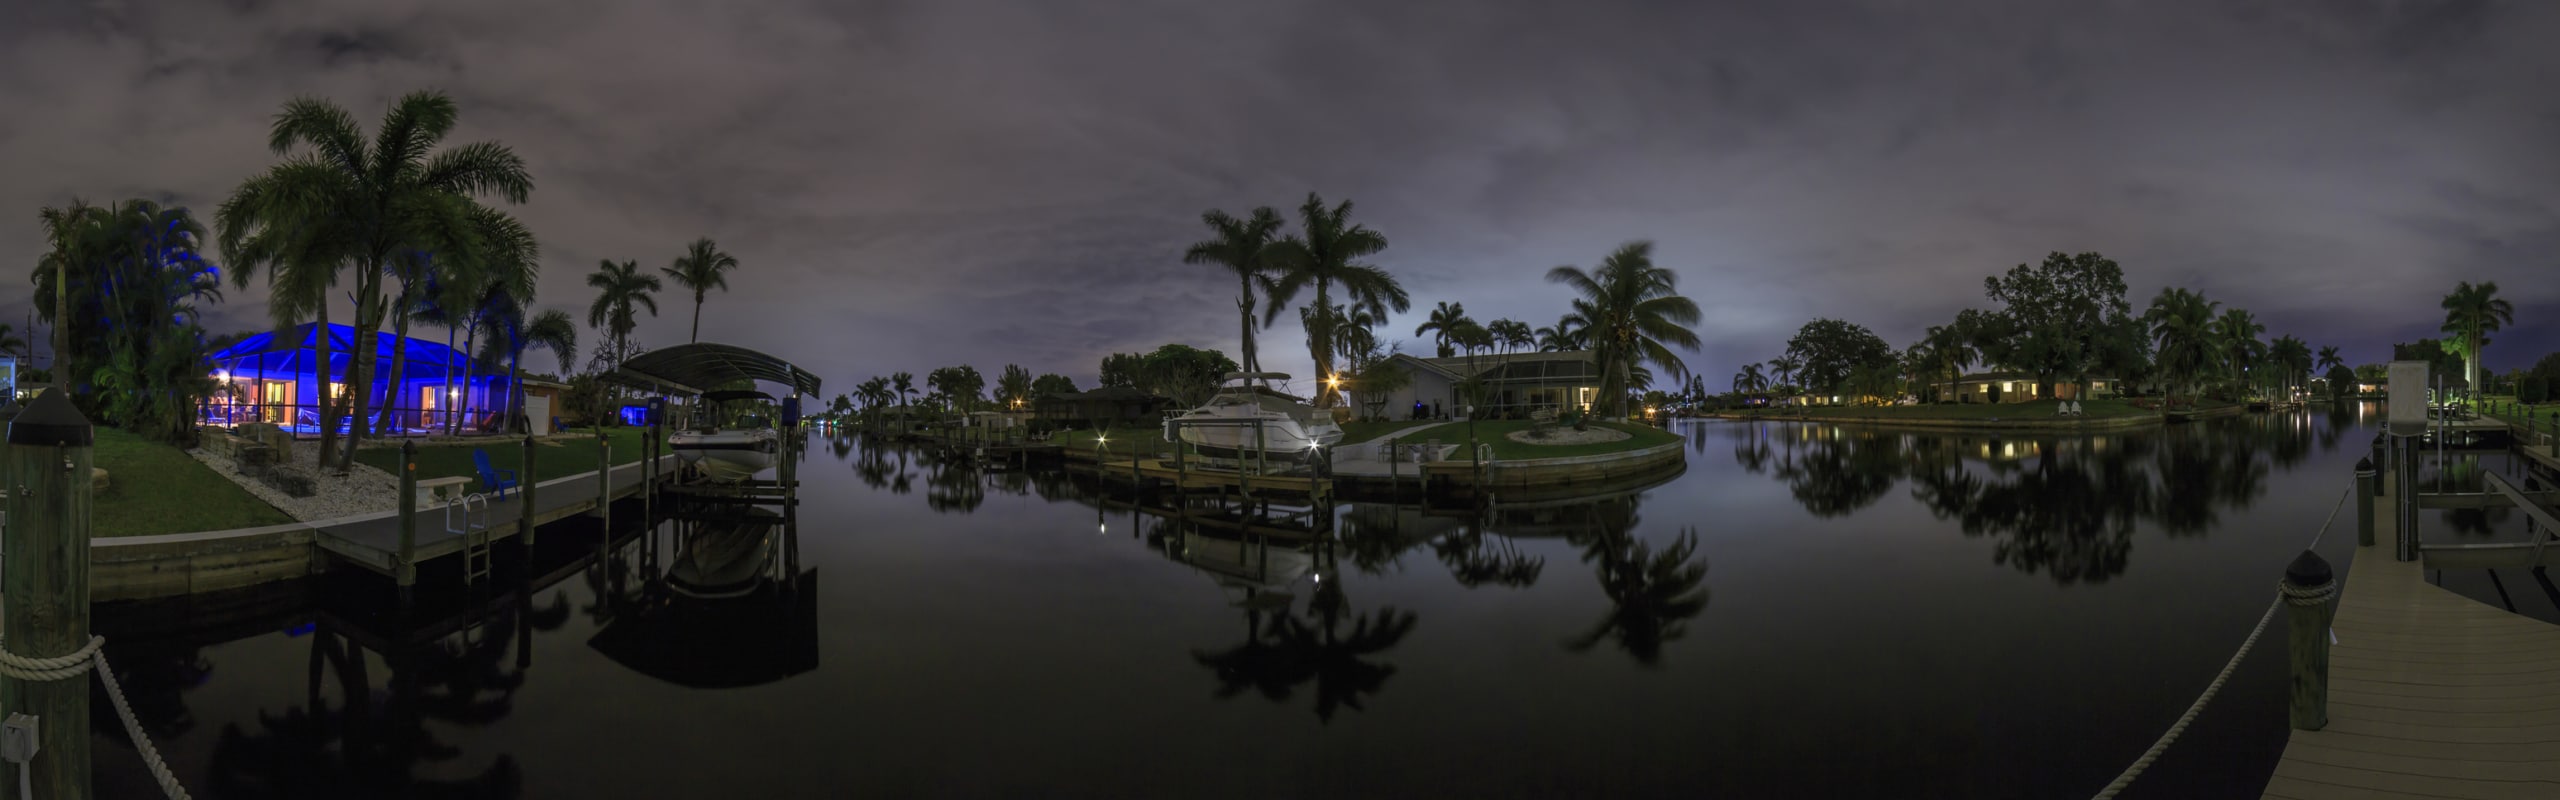 cape coral boating community